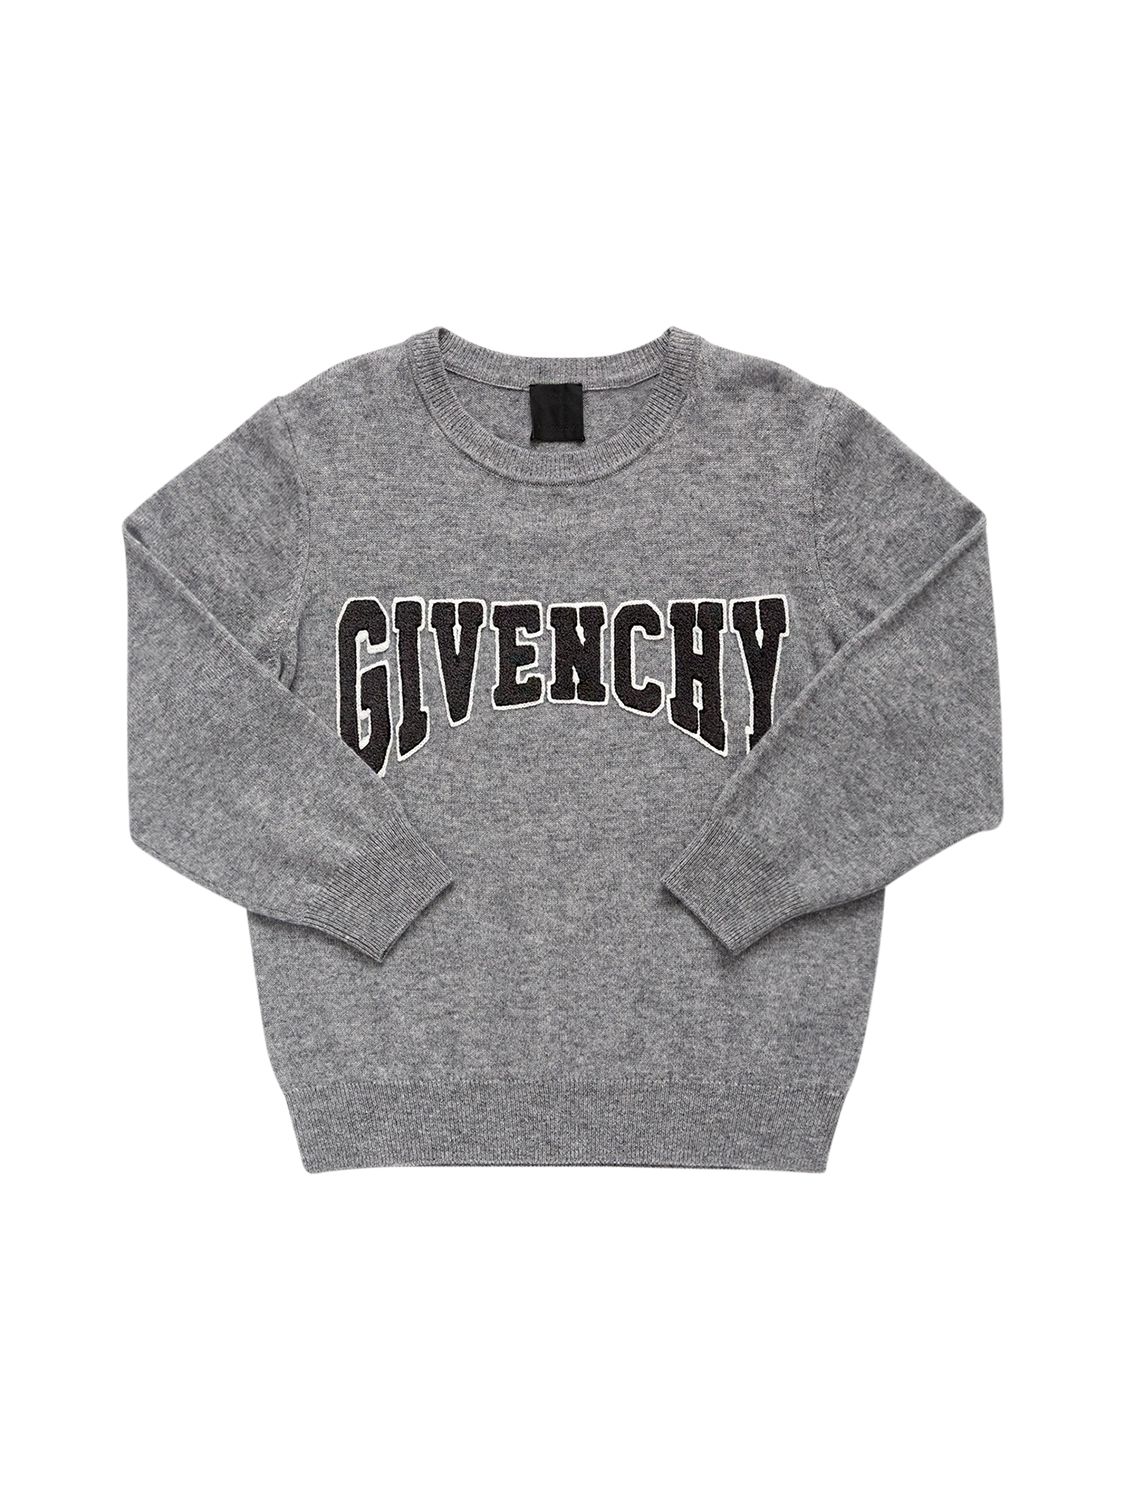 Givenchy Wool & Cashmere Blend Knit Sweater In Gray